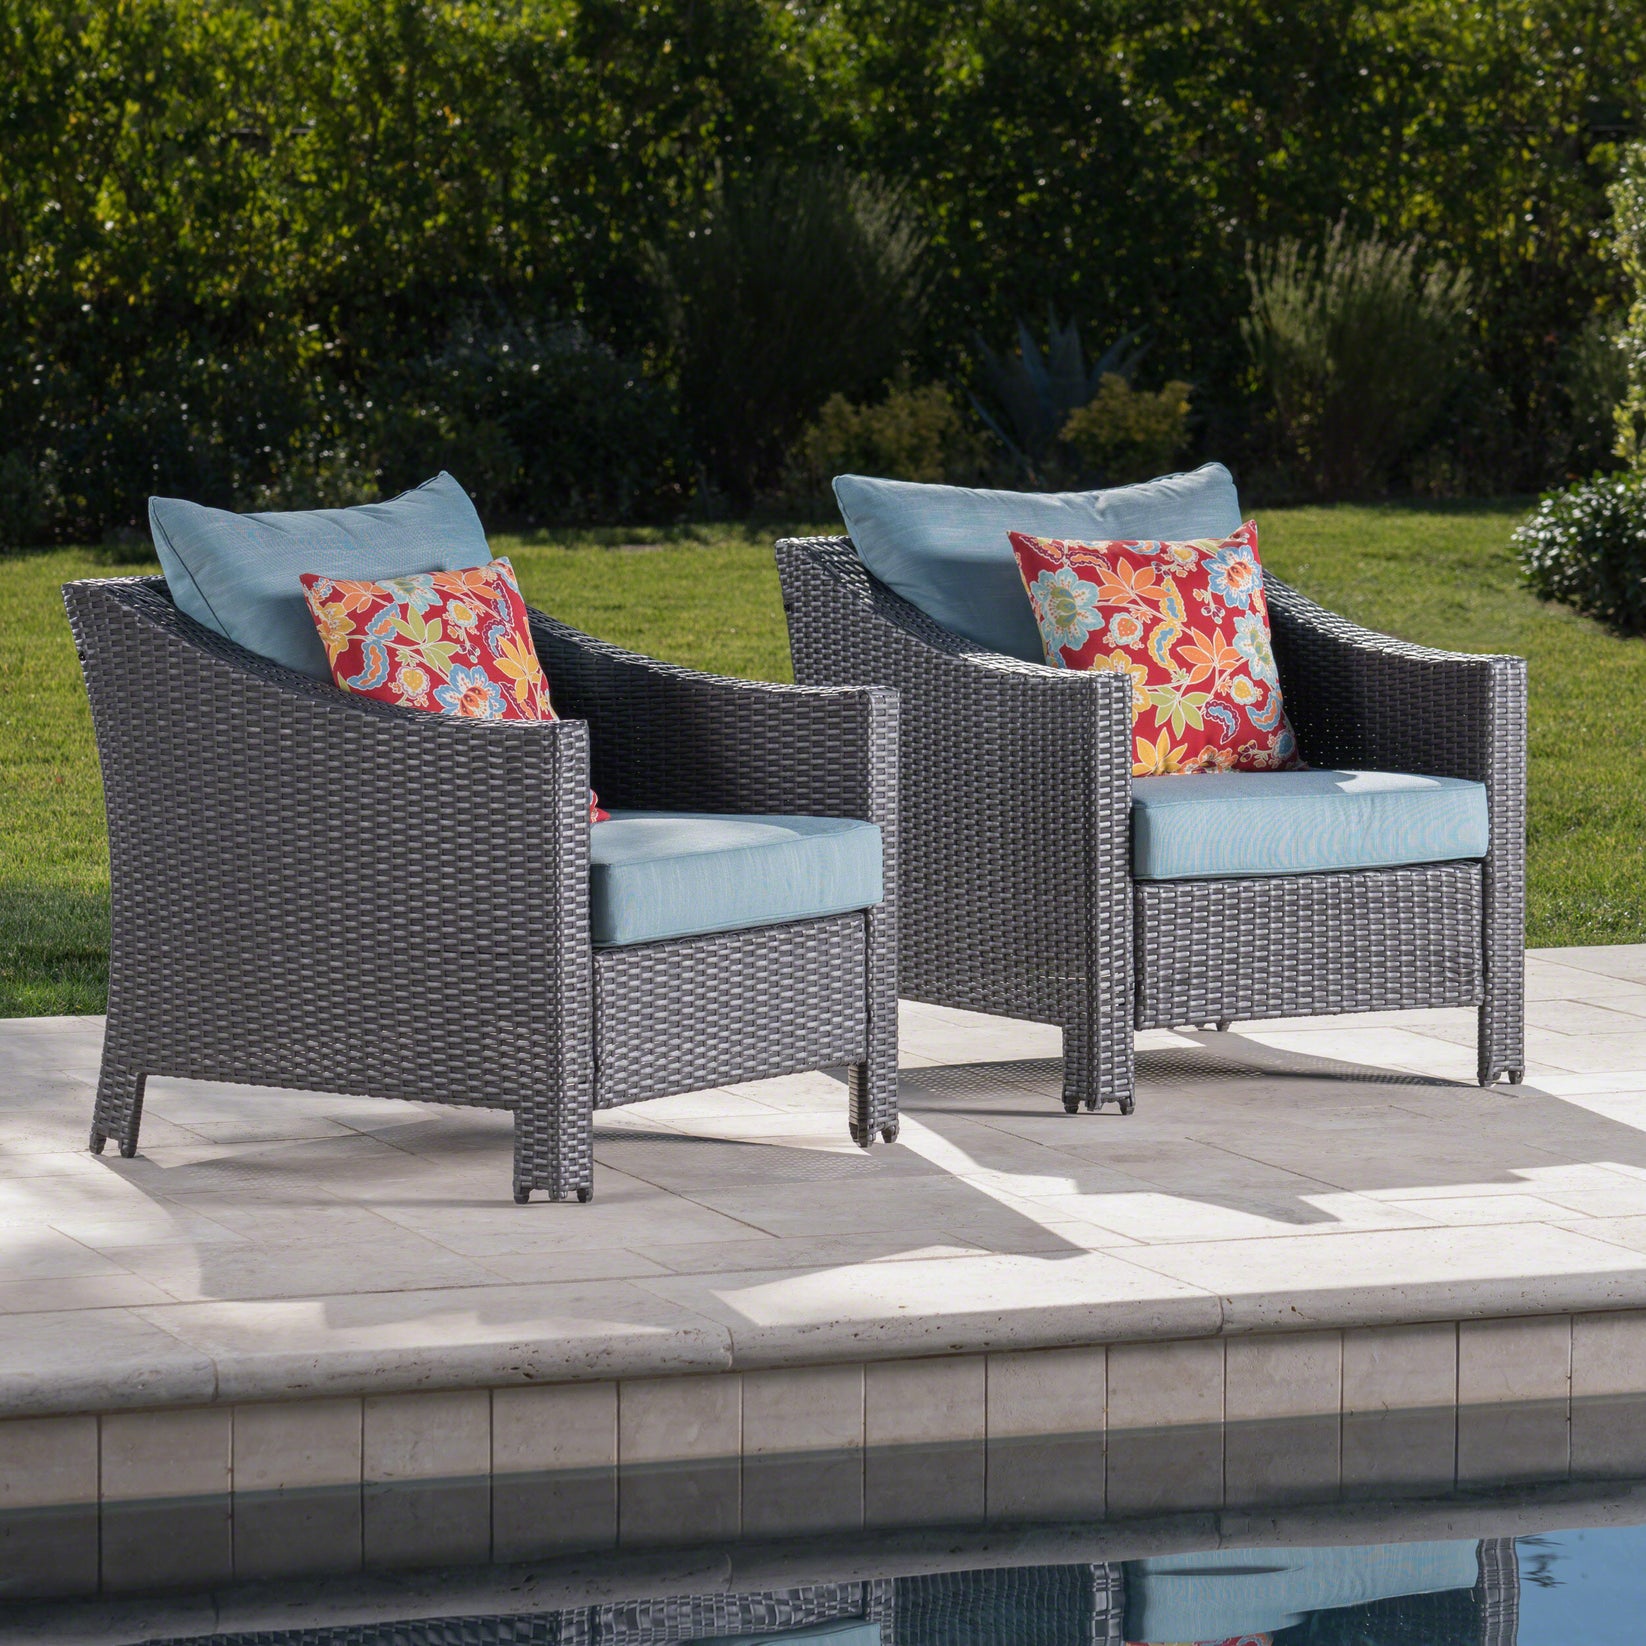 Caspian Outdoor Gray Wicker Club Chairs with Teal Water Resistant Cush ...